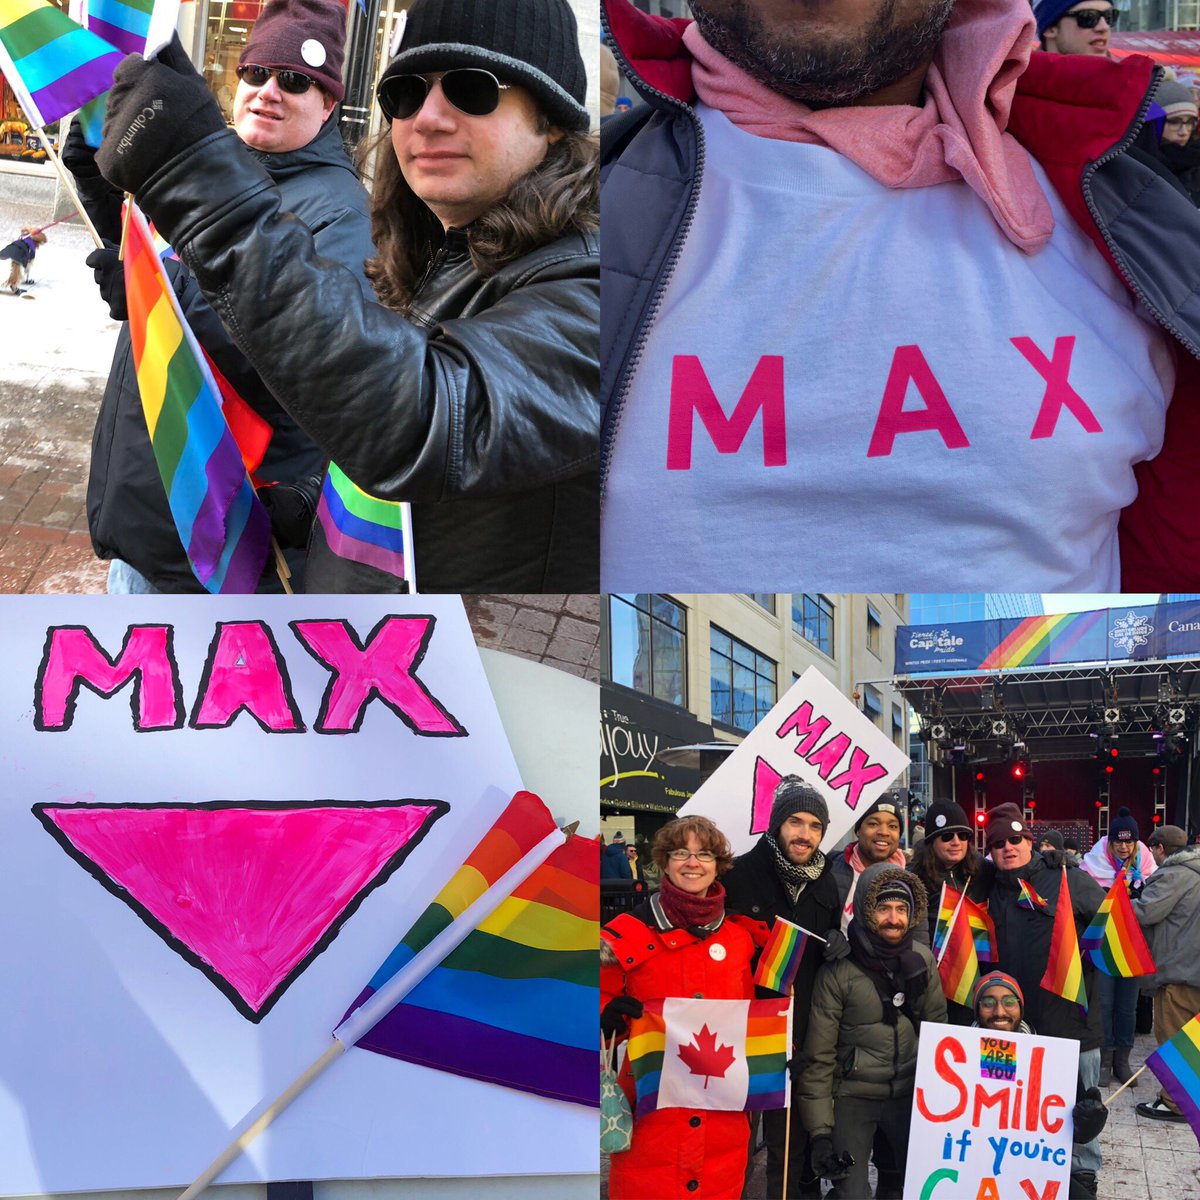 @max_ottawa was grateful to show our #pride this afternoon @FierteCapPride’ march today! 
#maxottawa #guysintoguys #togetherwerestronger! #Winterpride